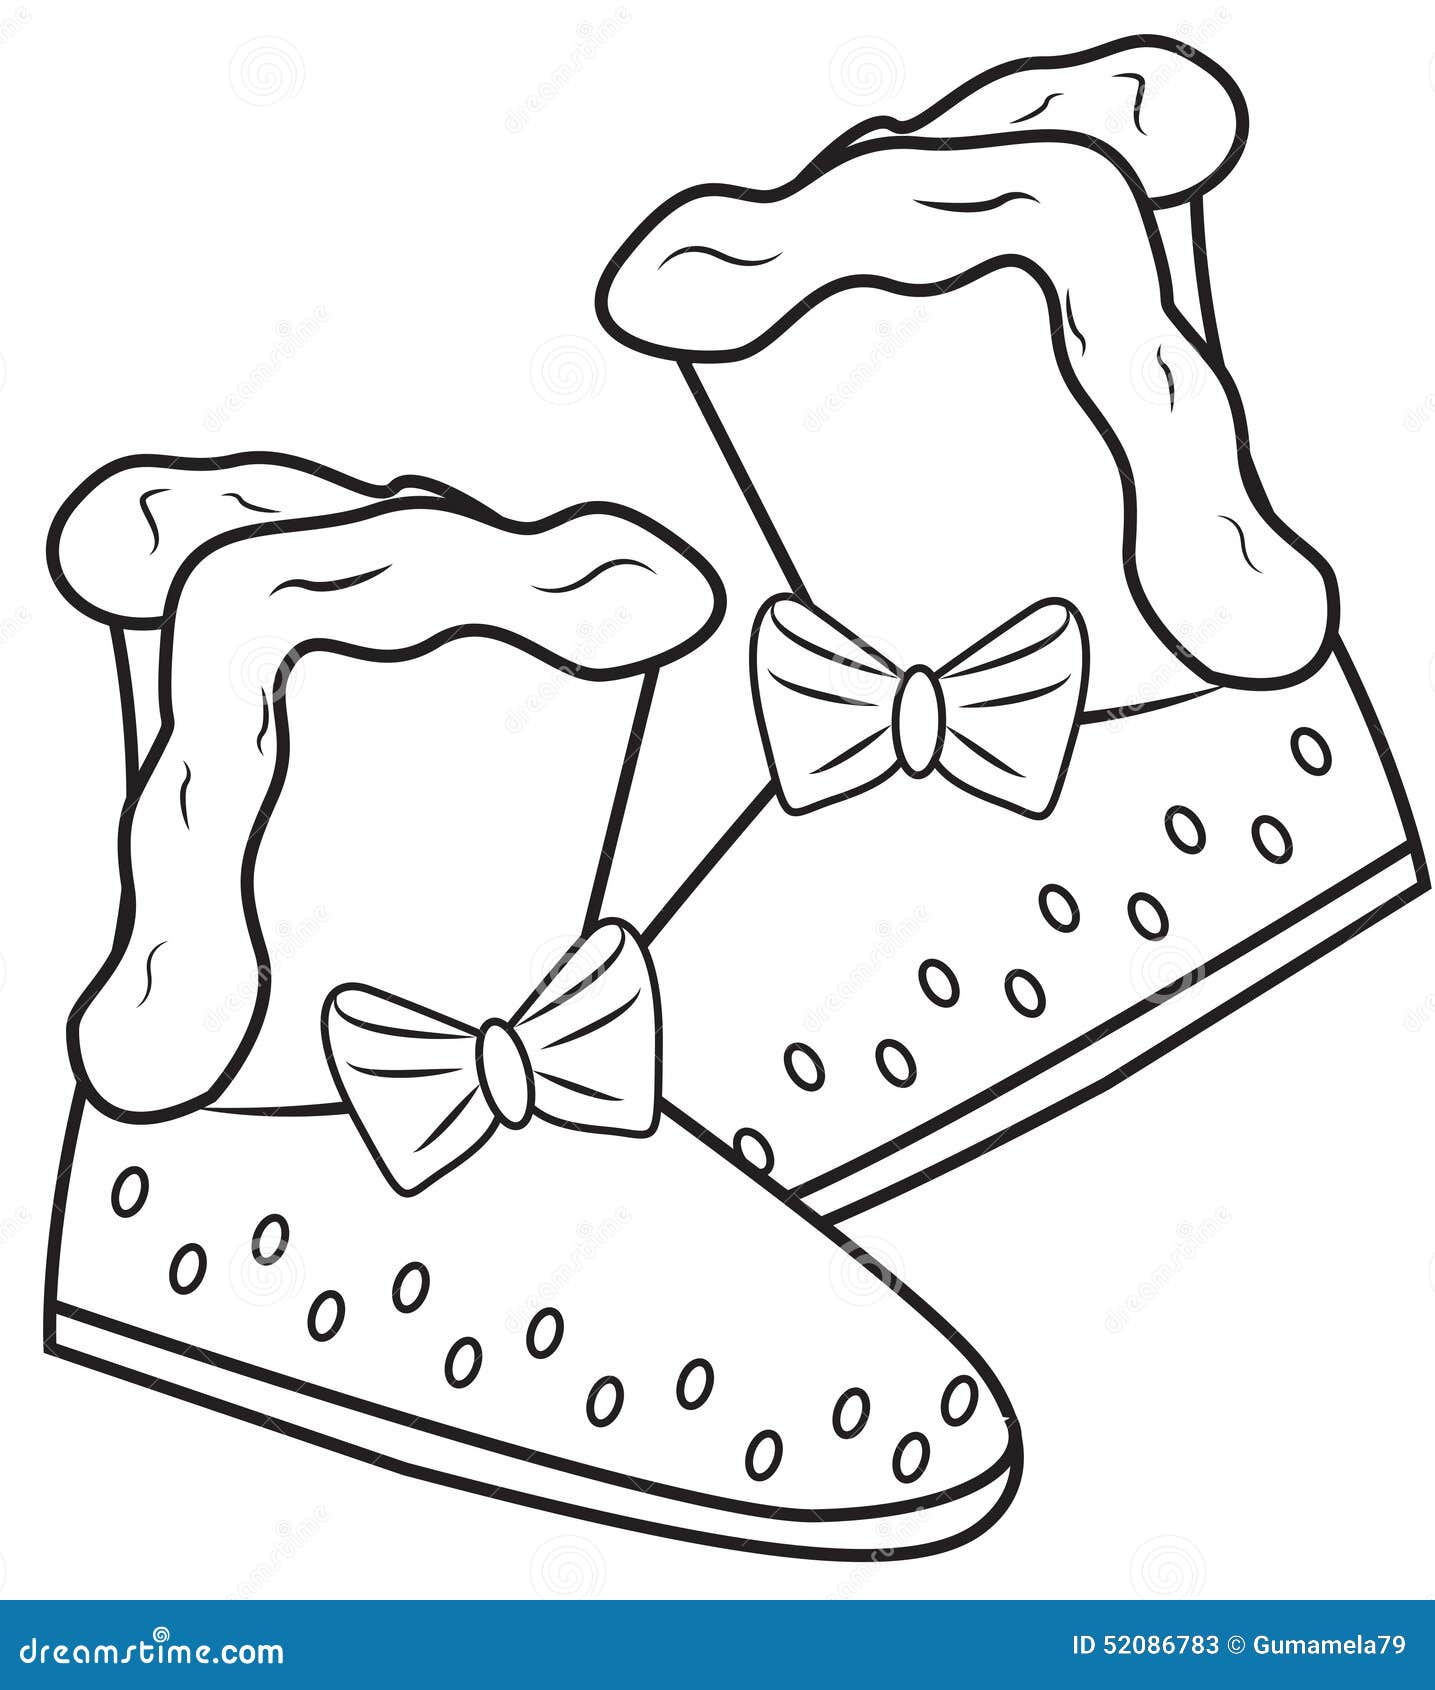 Girl s boots coloring page stock illustration. Illustration of detail